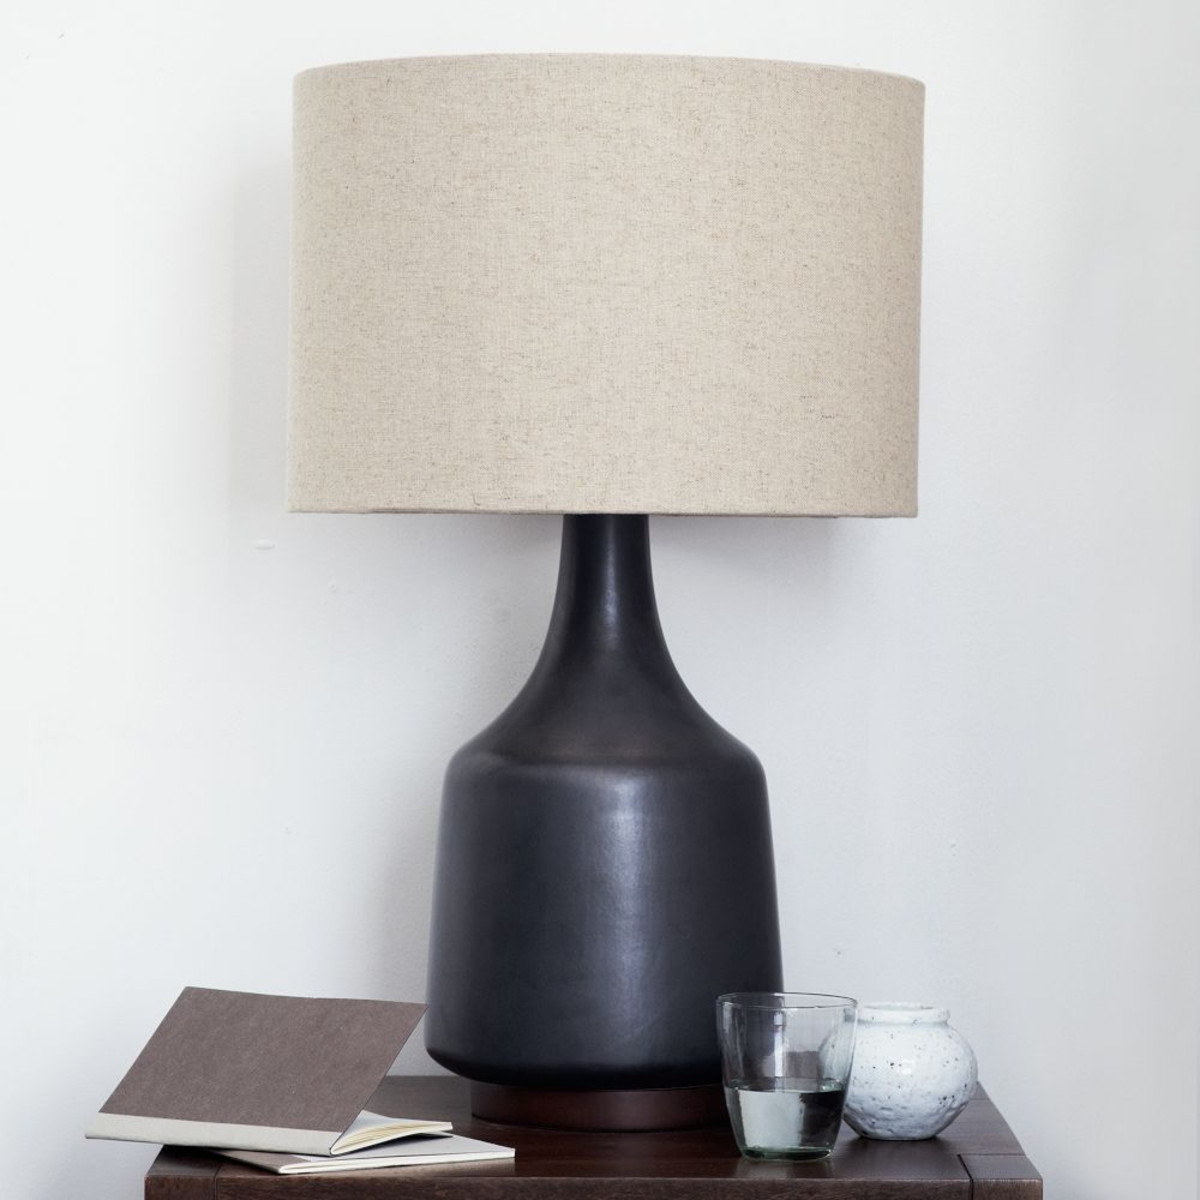 Oval Black Table Lamps Disacode Home Design From Special in measurements 1200 X 1200